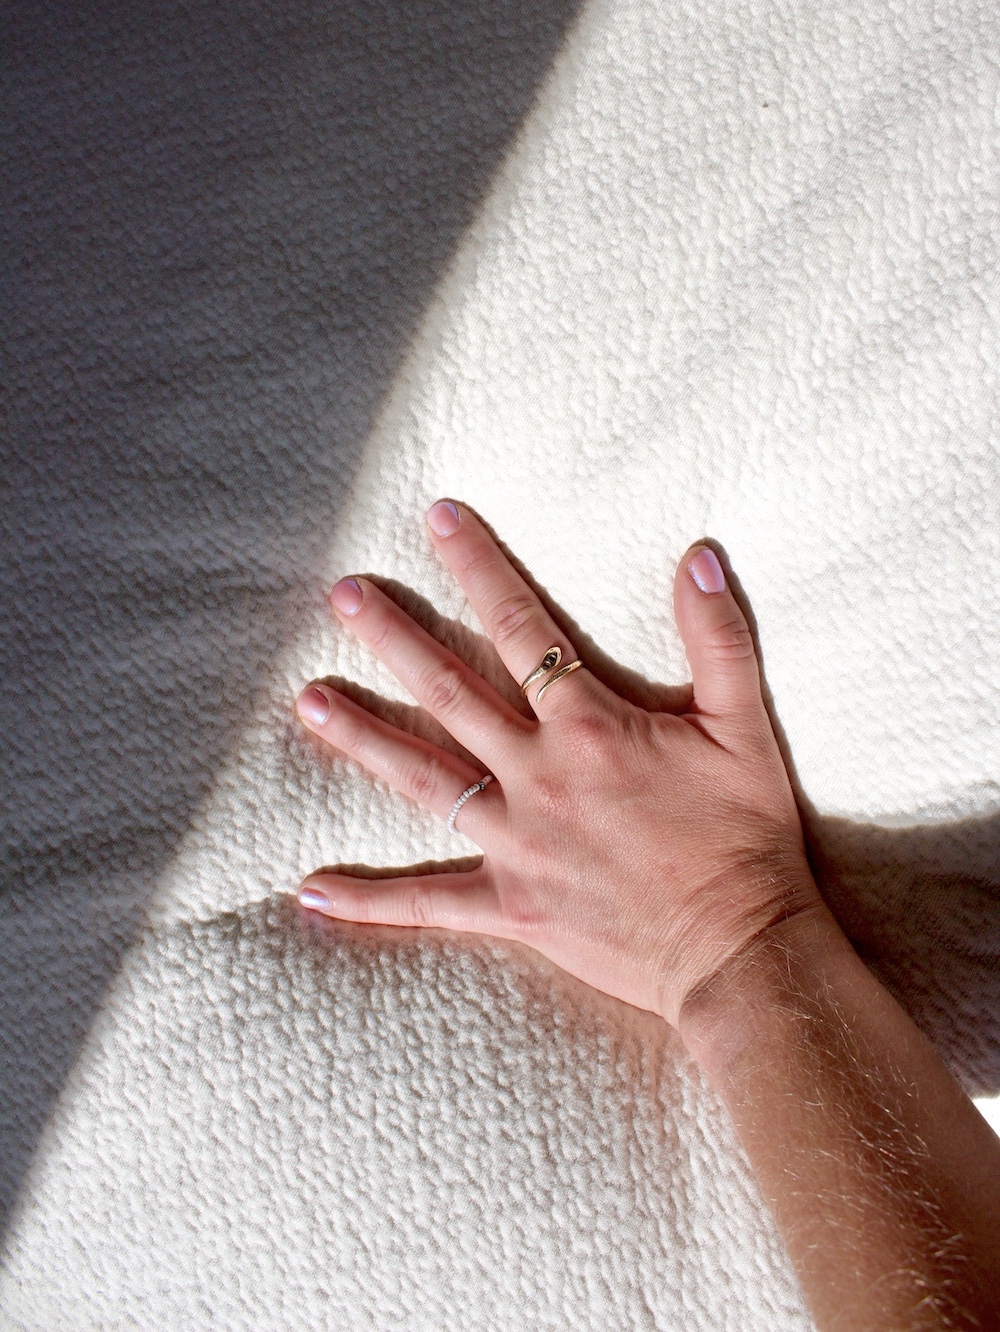 A hand with a gold ring on the middle finger and a silver ring on the ring finger rests on an organic mattress's textured white surface, illuminated by sunlight.